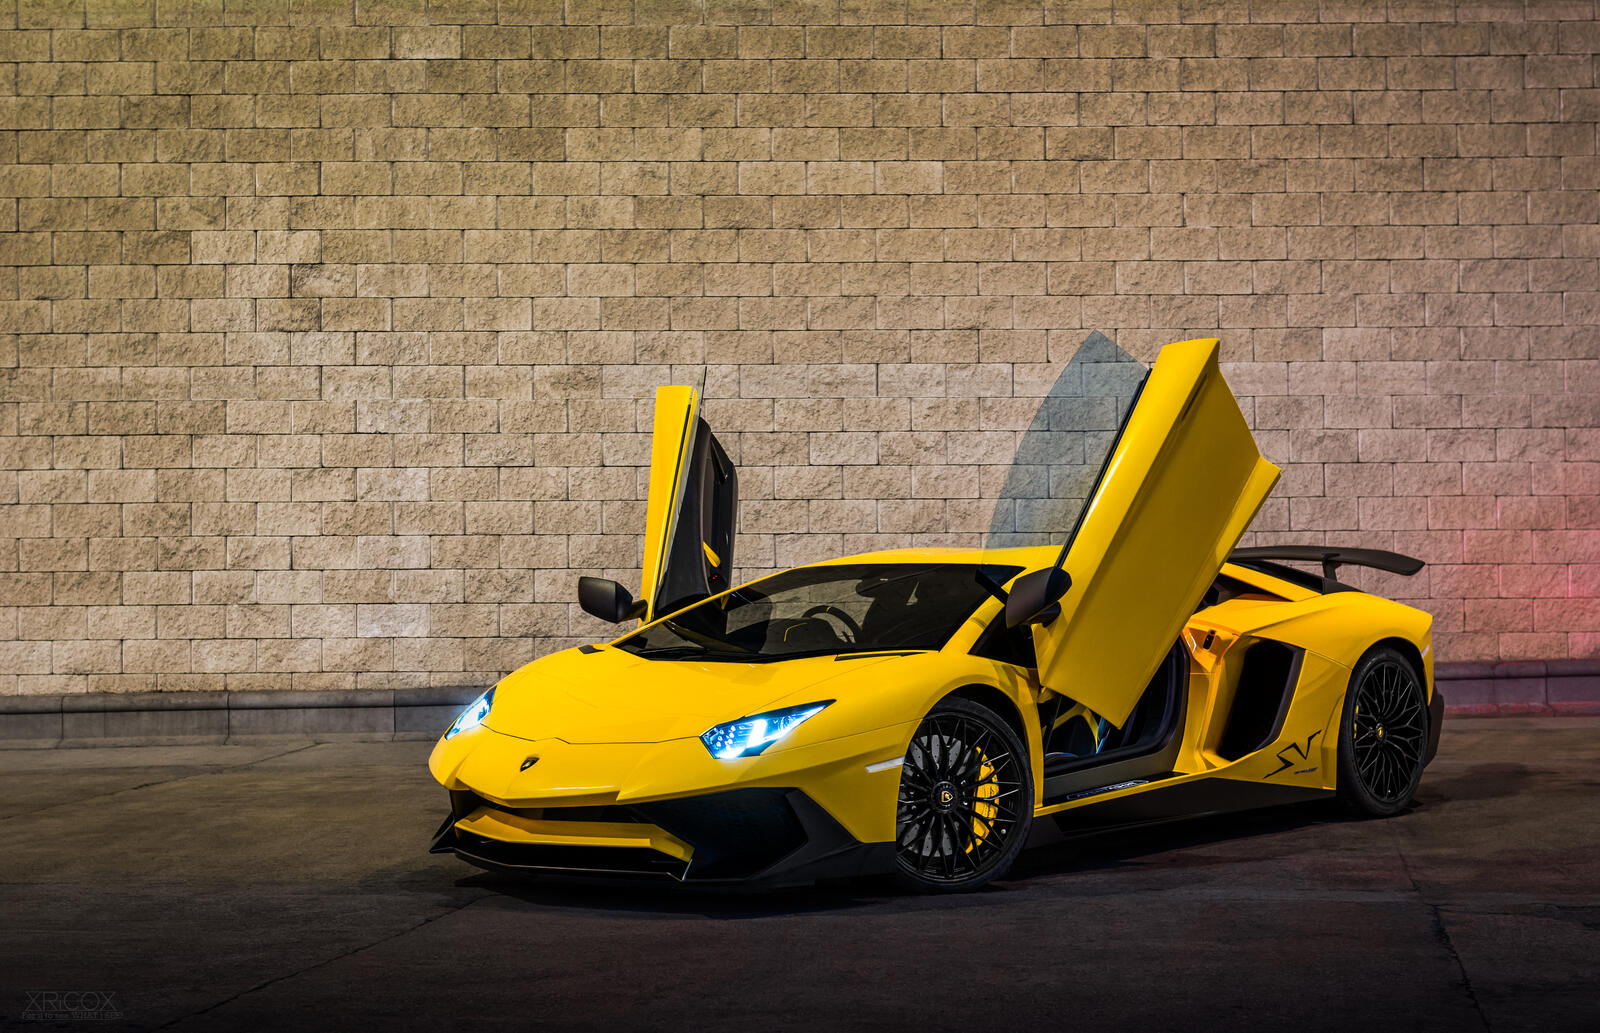 Free photo A picture of a yellow Lamborghini Aventador with the doors open.